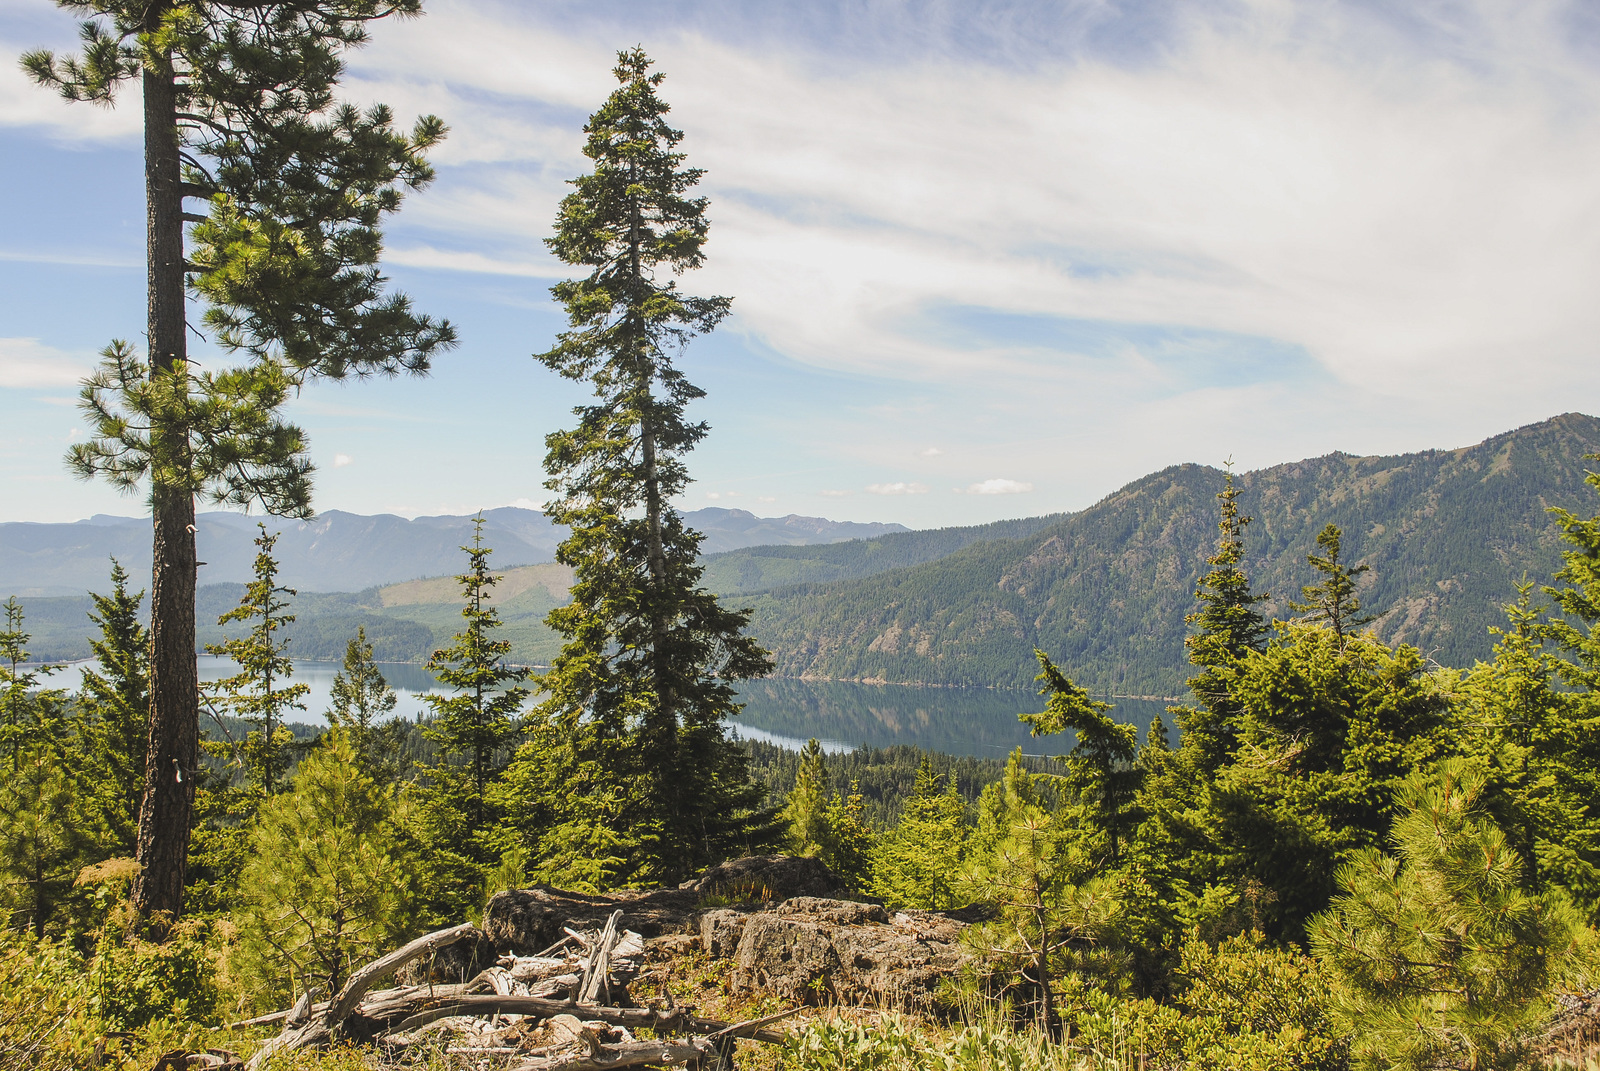  Lake Cle Elum is in Wenatchee National Forest, Kittitas County, where we’re working to protect acres of forestland along the Pacific Crest Trail with support from LWCF. Photo by Zoe van Duivenbode 